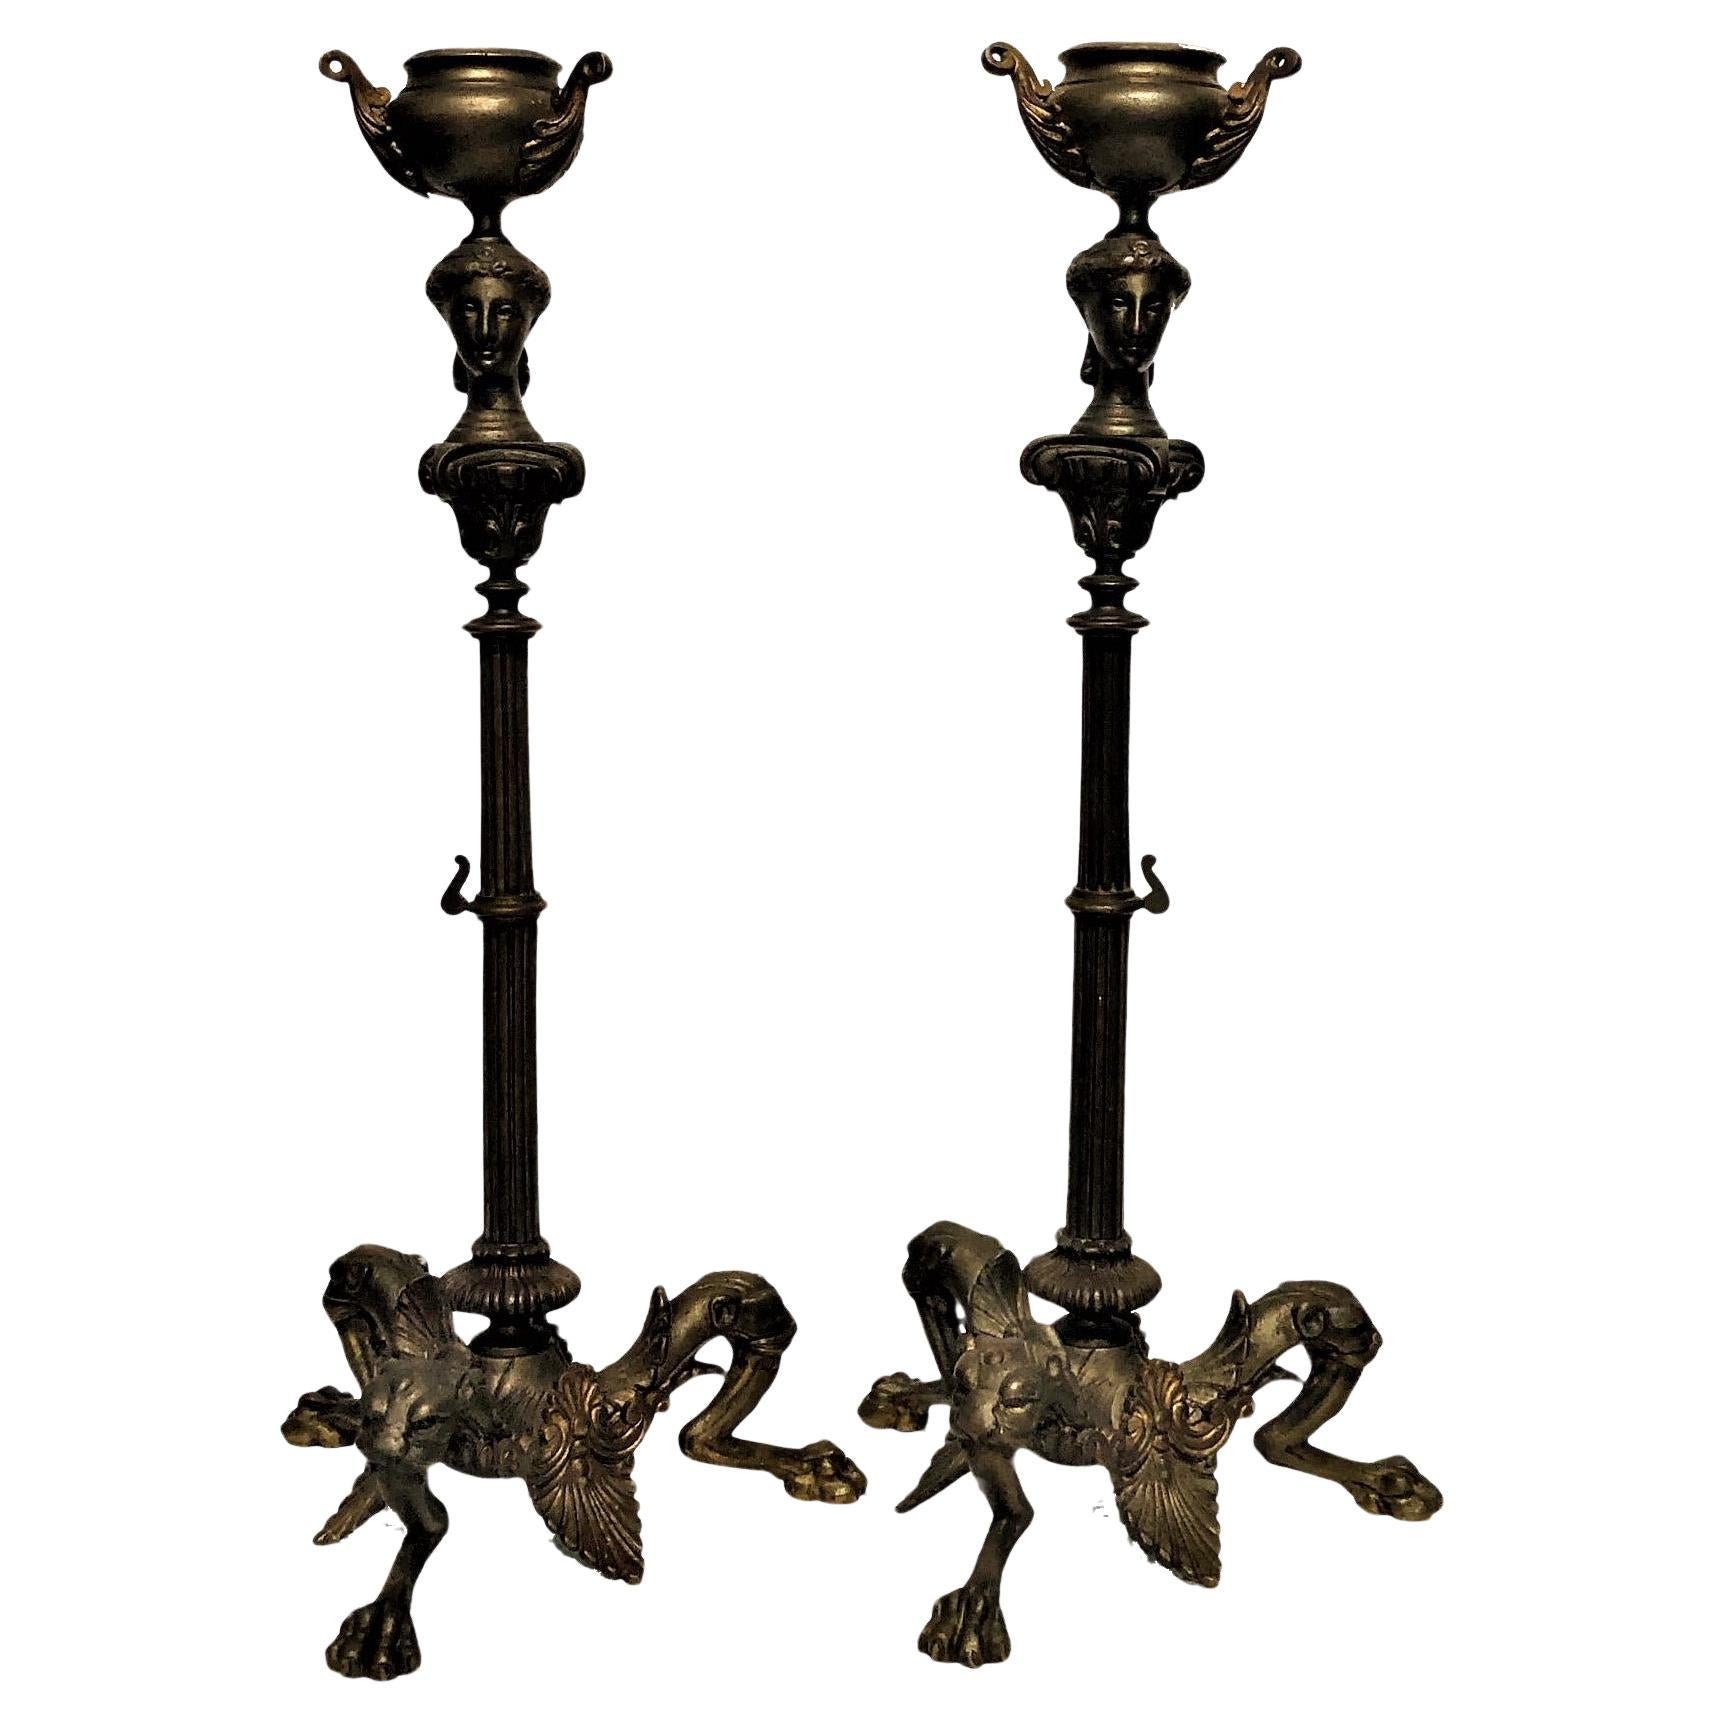 A Pair of Bronze Neoclassical Grand Tour Candelabras, Late 19th Century